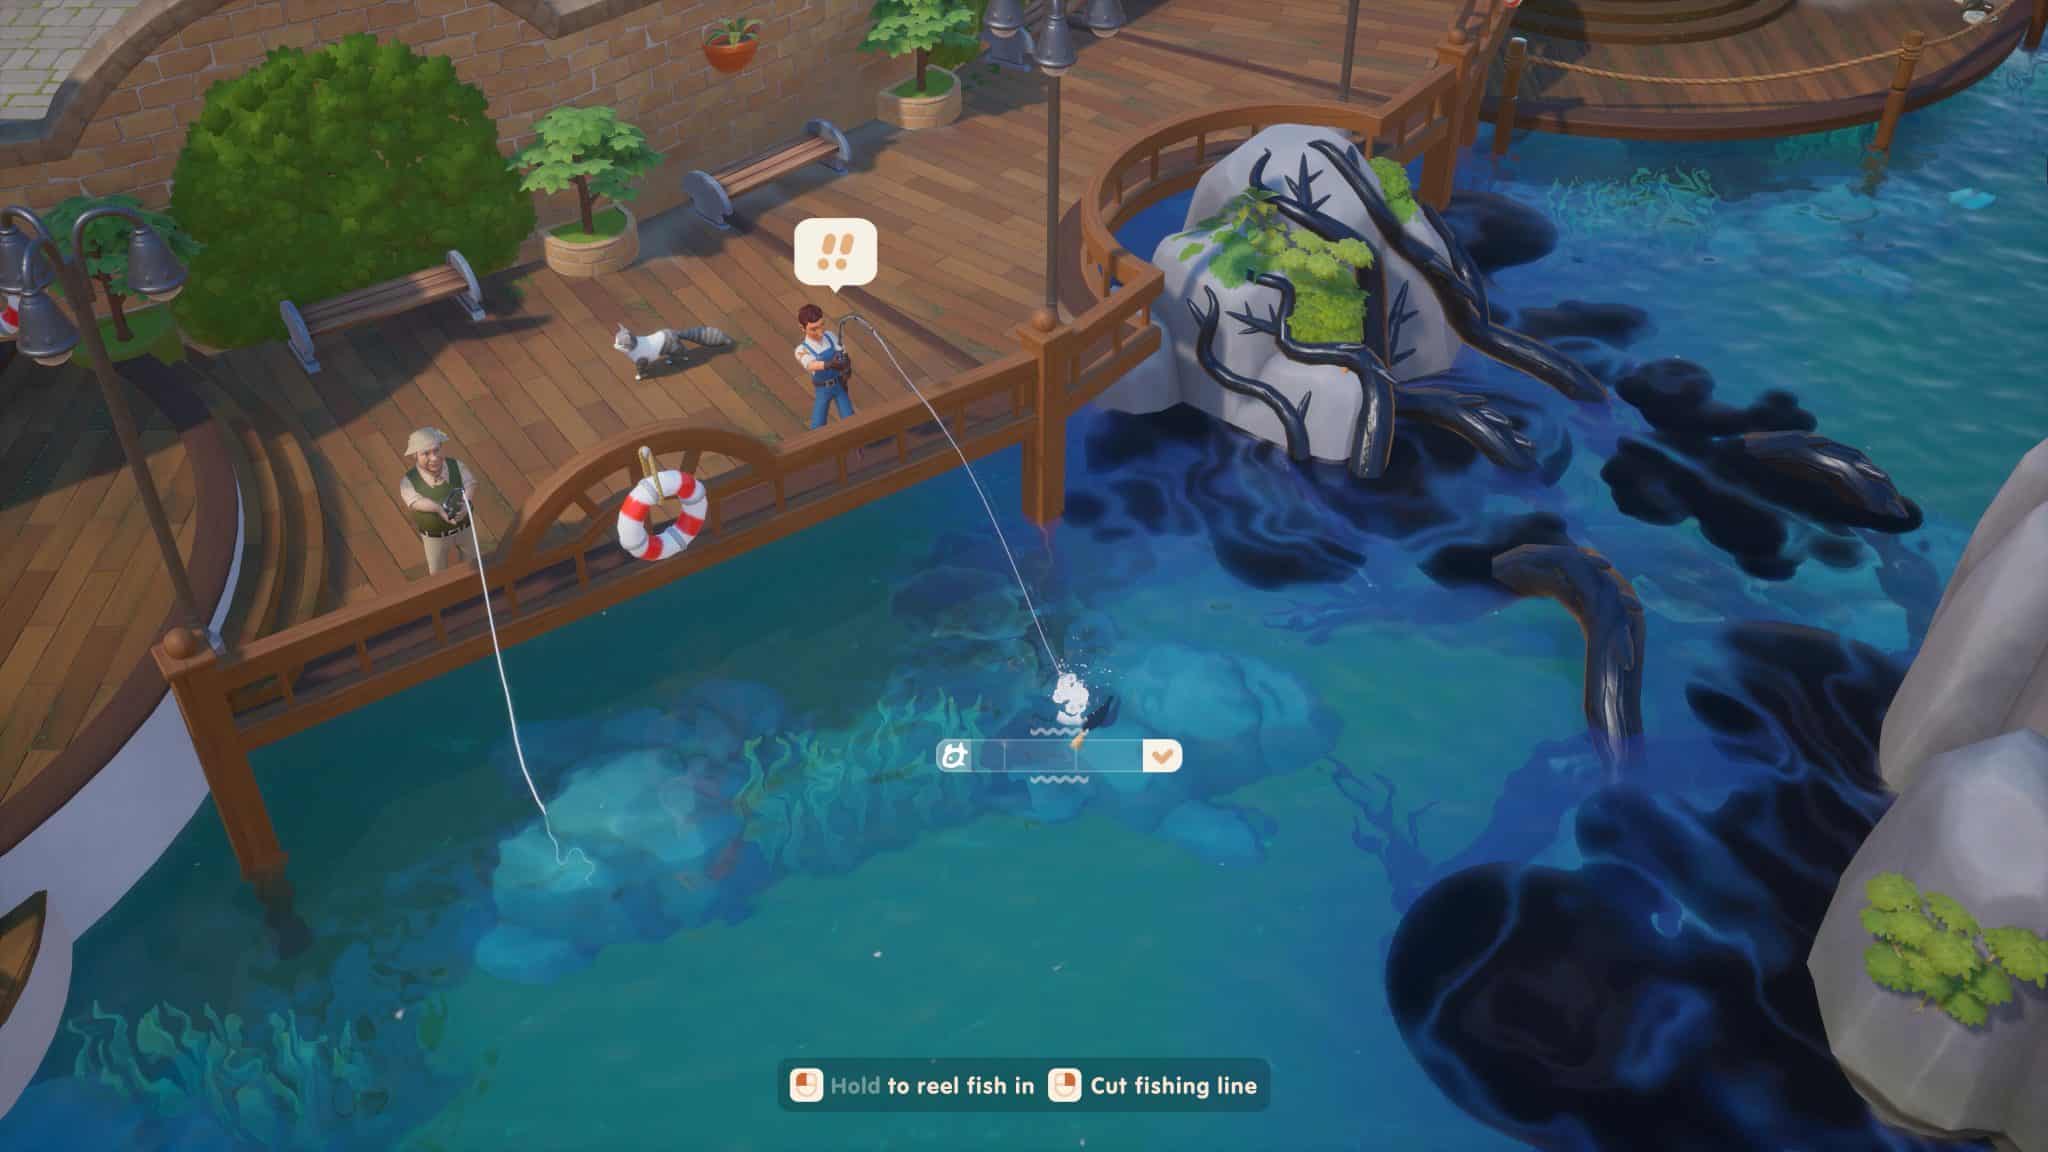 Official image of fishing minigame in Coral Island